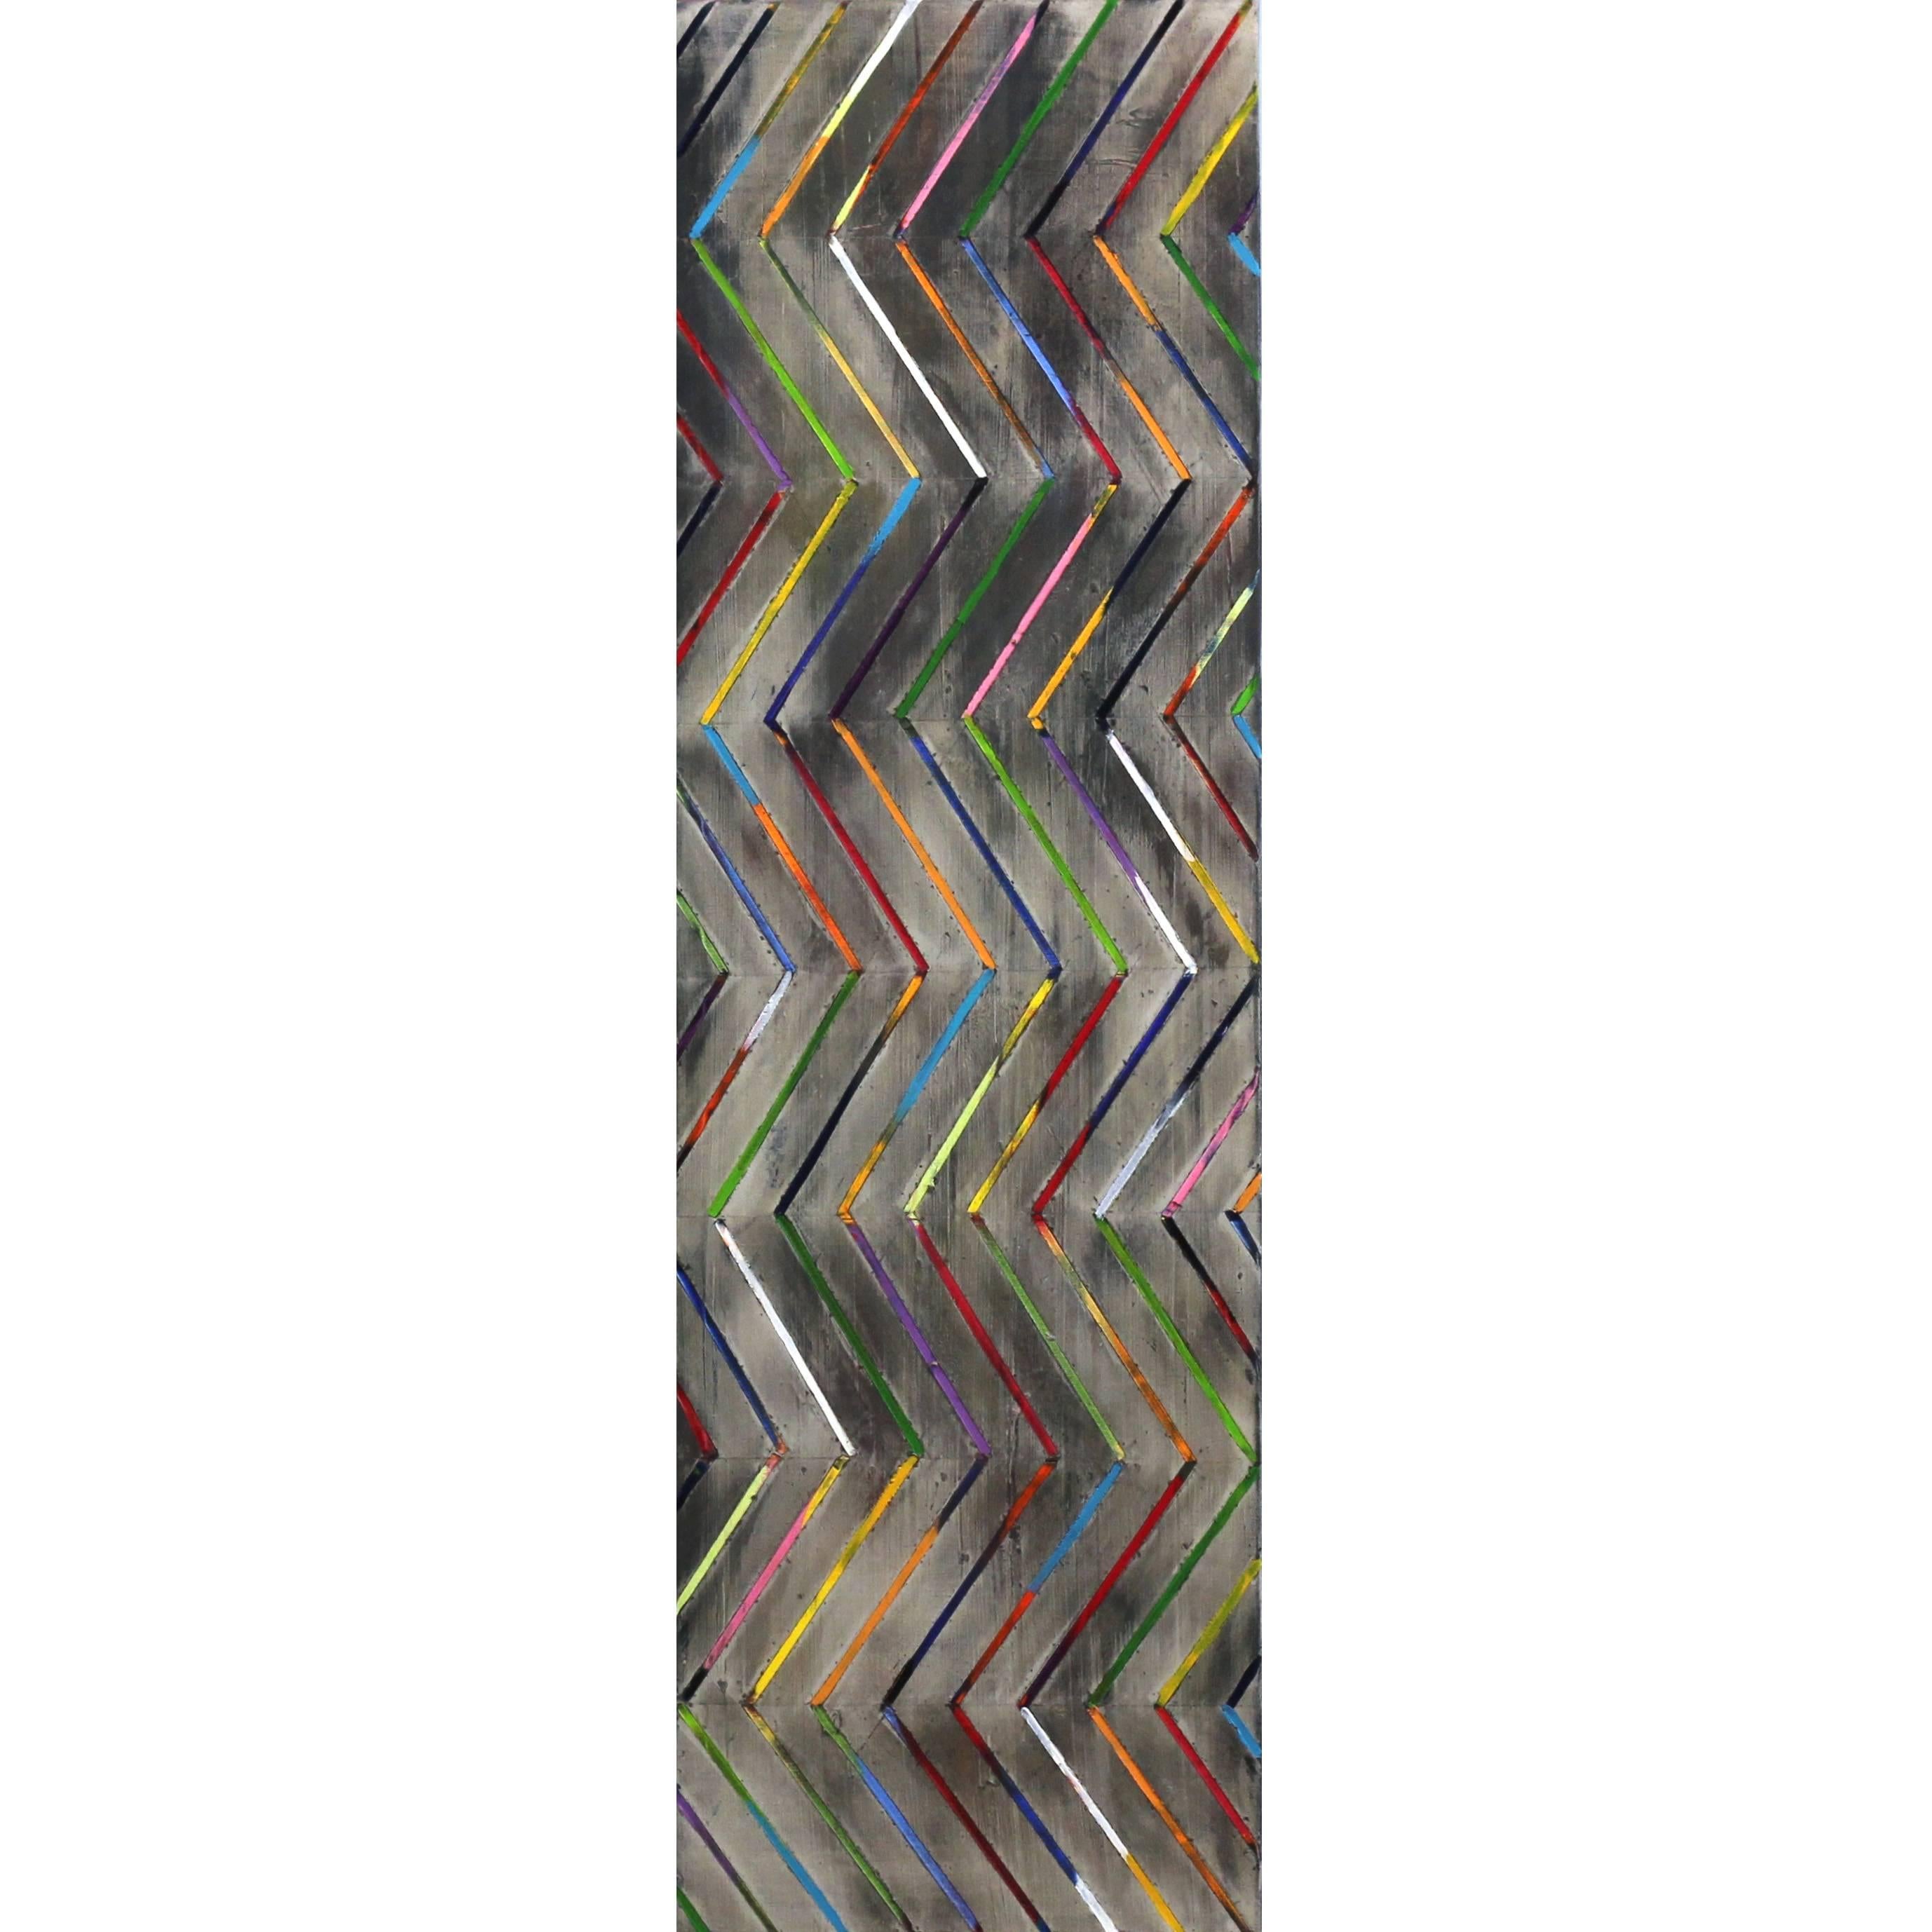 Zig Zag 16-3-2 - Original Colorful Oil Painting Stripes with Texture